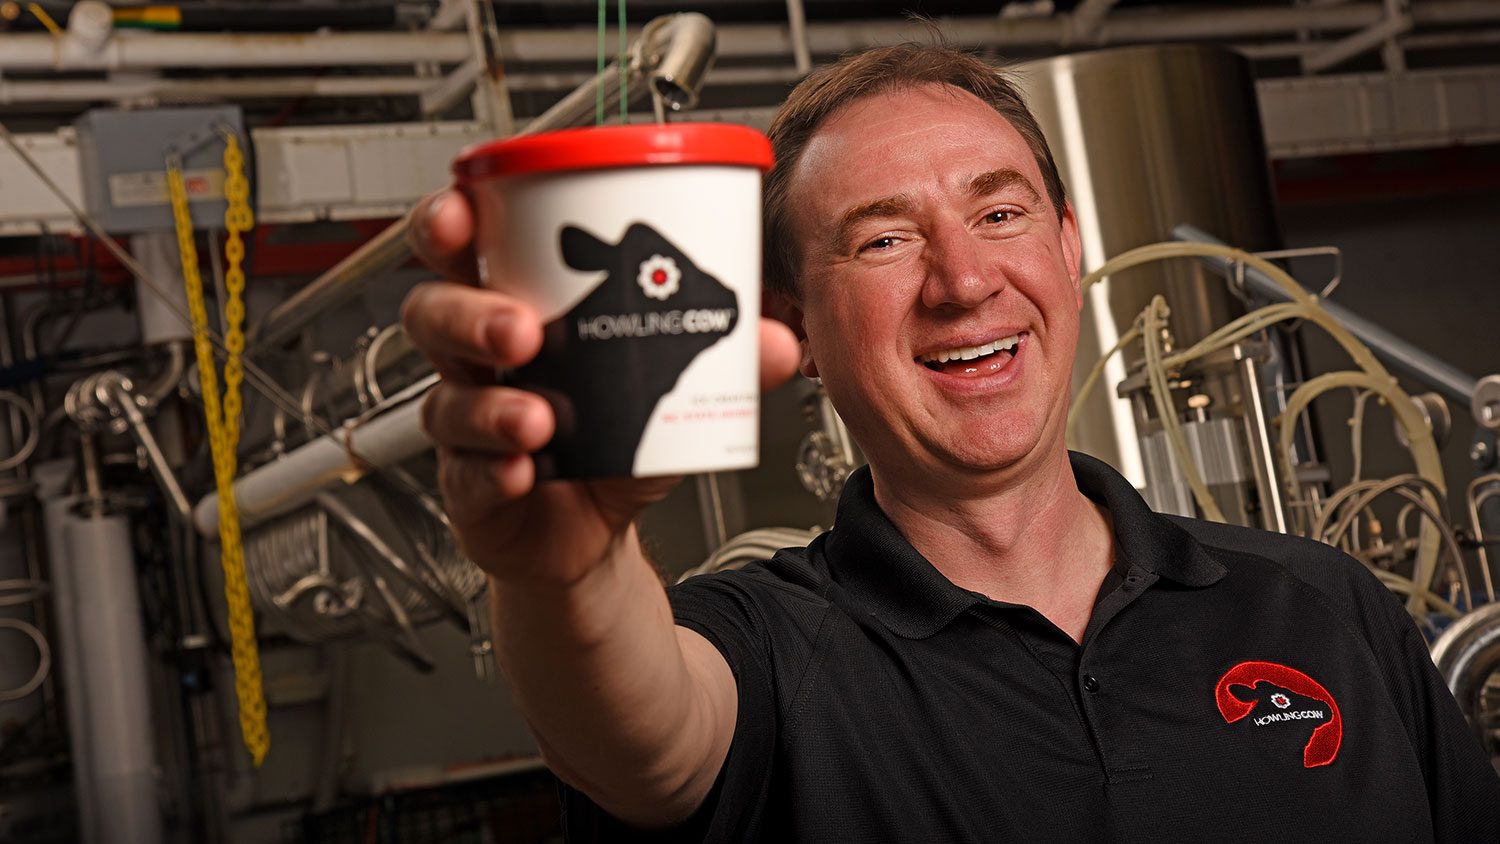 Carl Hollifield holding a container of Howling Cow ice cream